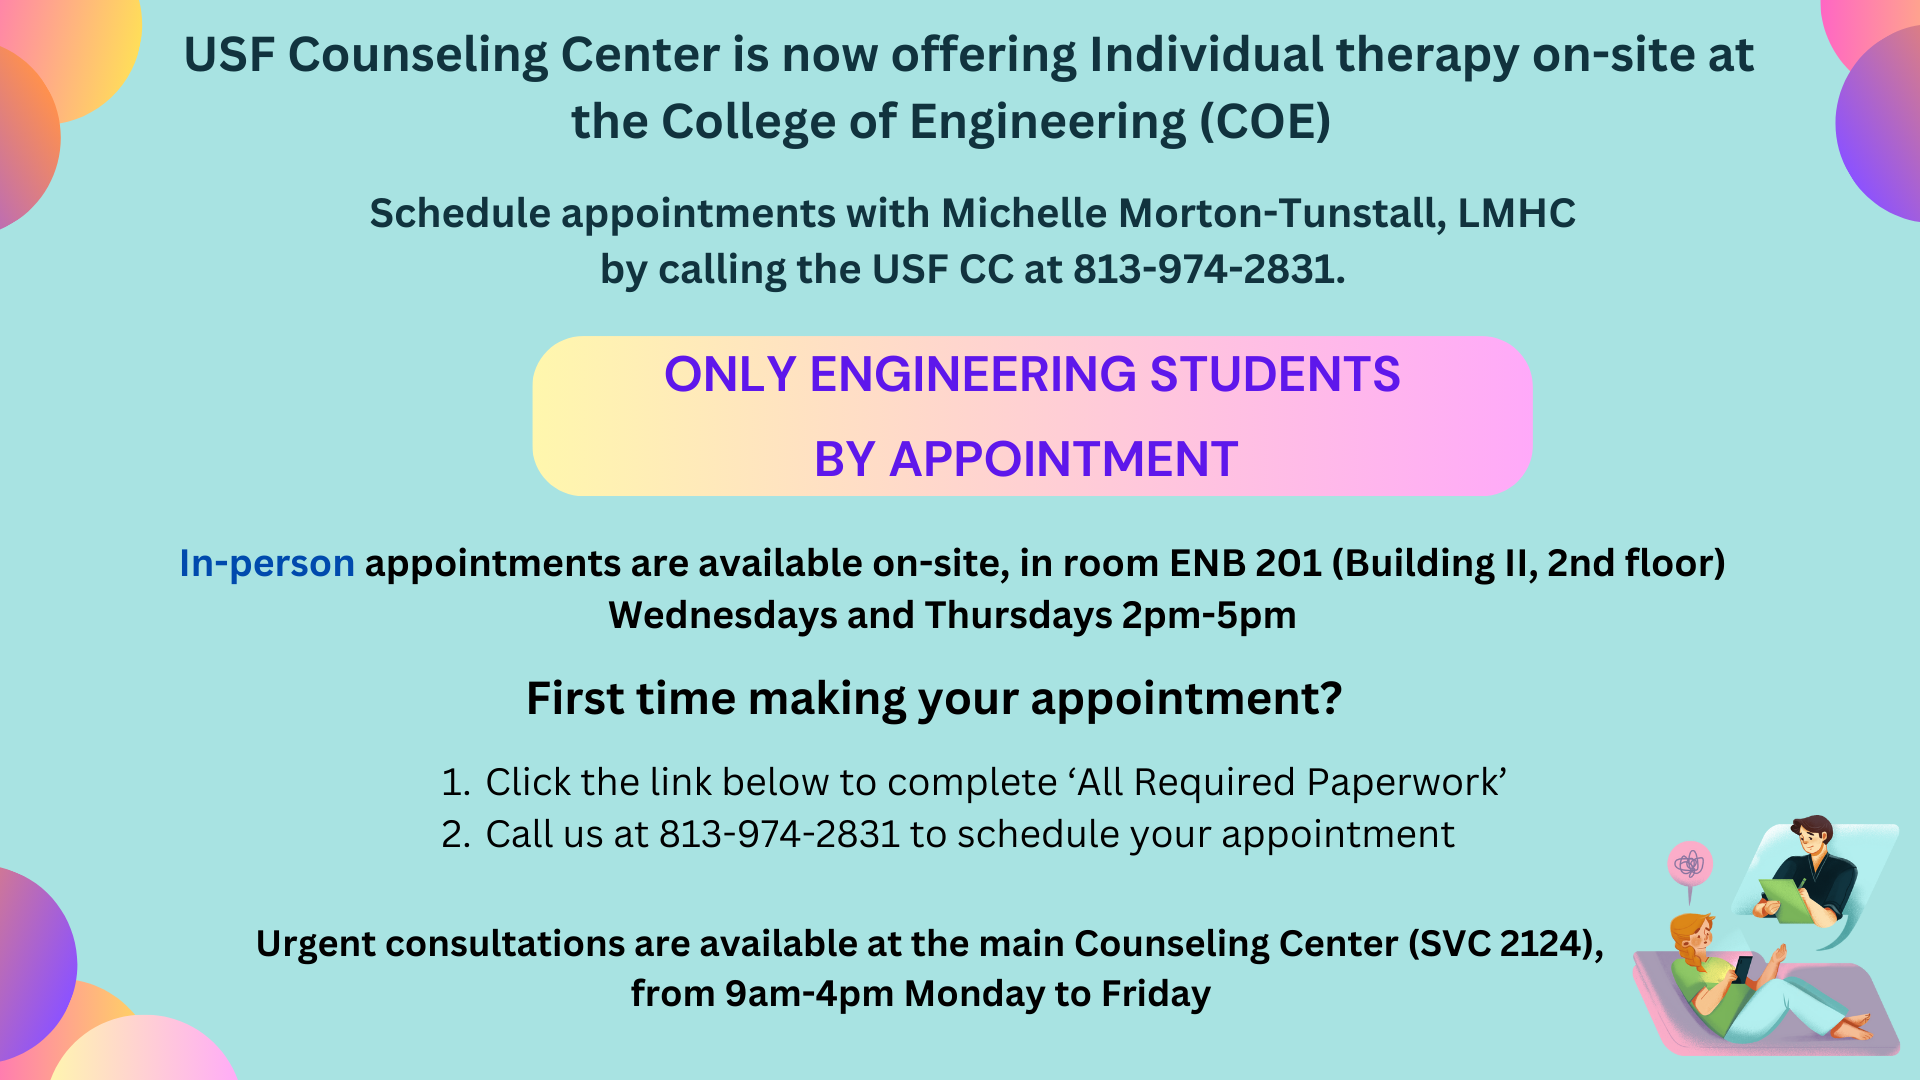 USF Counseling Center is now offering Individual therapy on-site at the College of Engineering (COE)